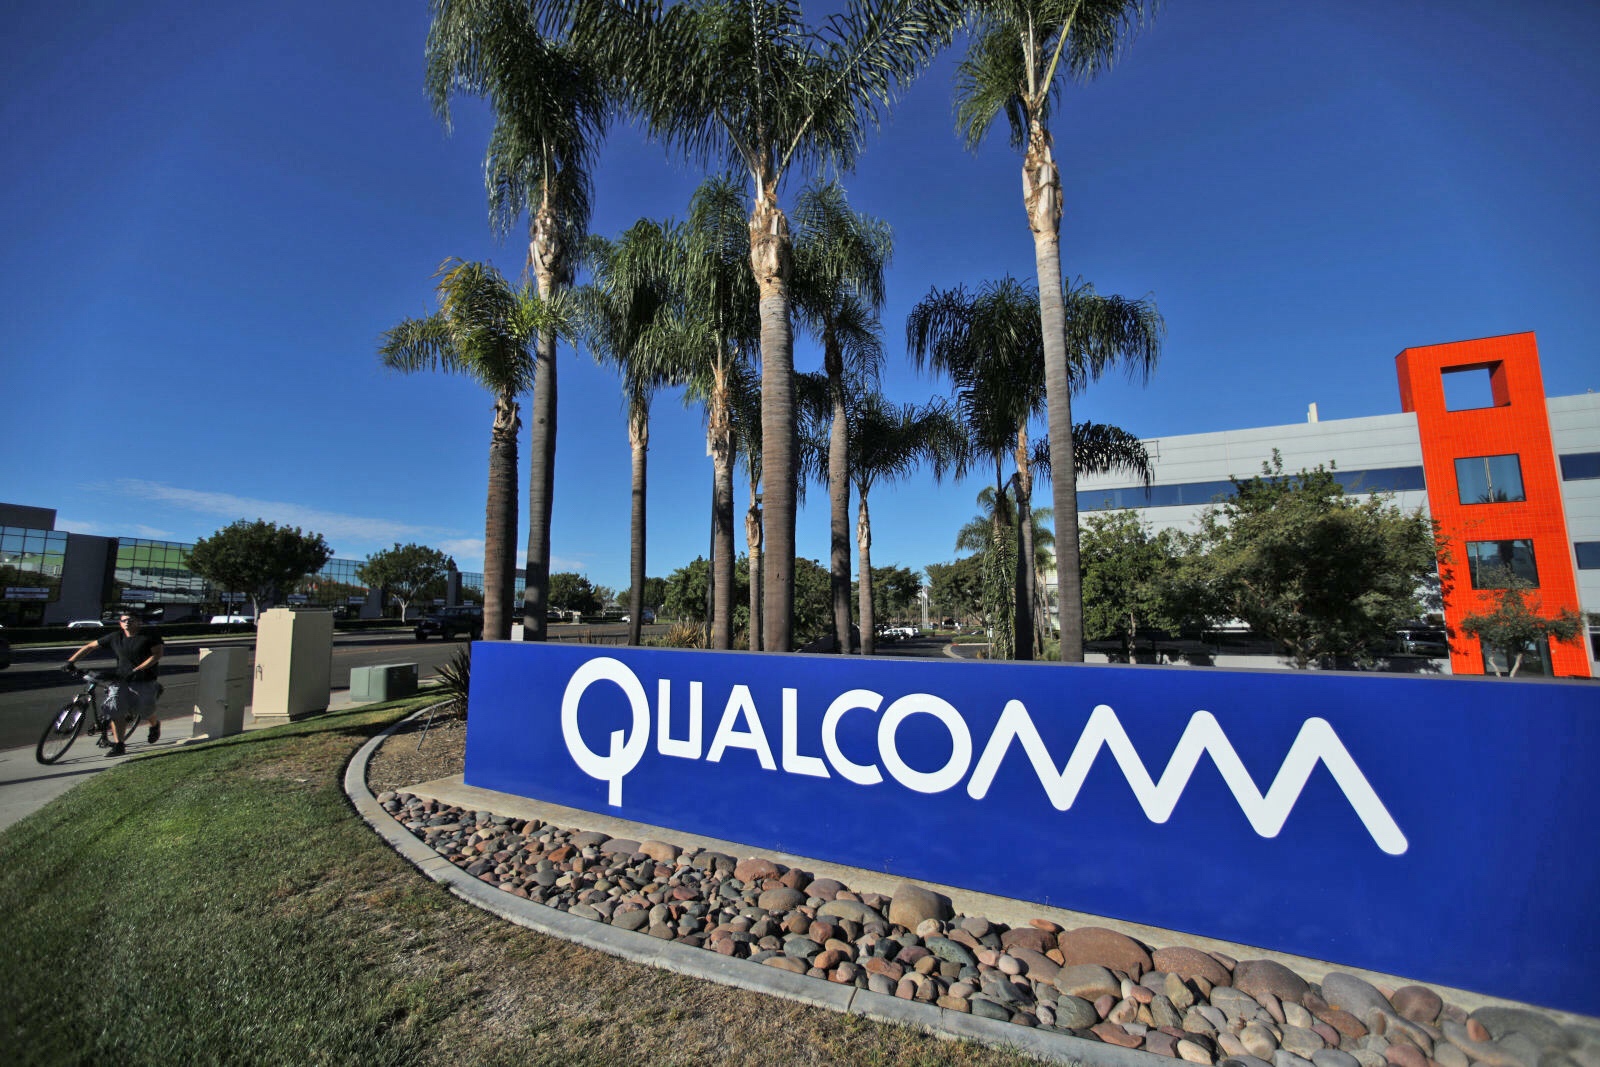 Qualcomm to lay off 1,500 workers to cut down expensesQualcomm to lay off 1,500 workers to cut down expenses